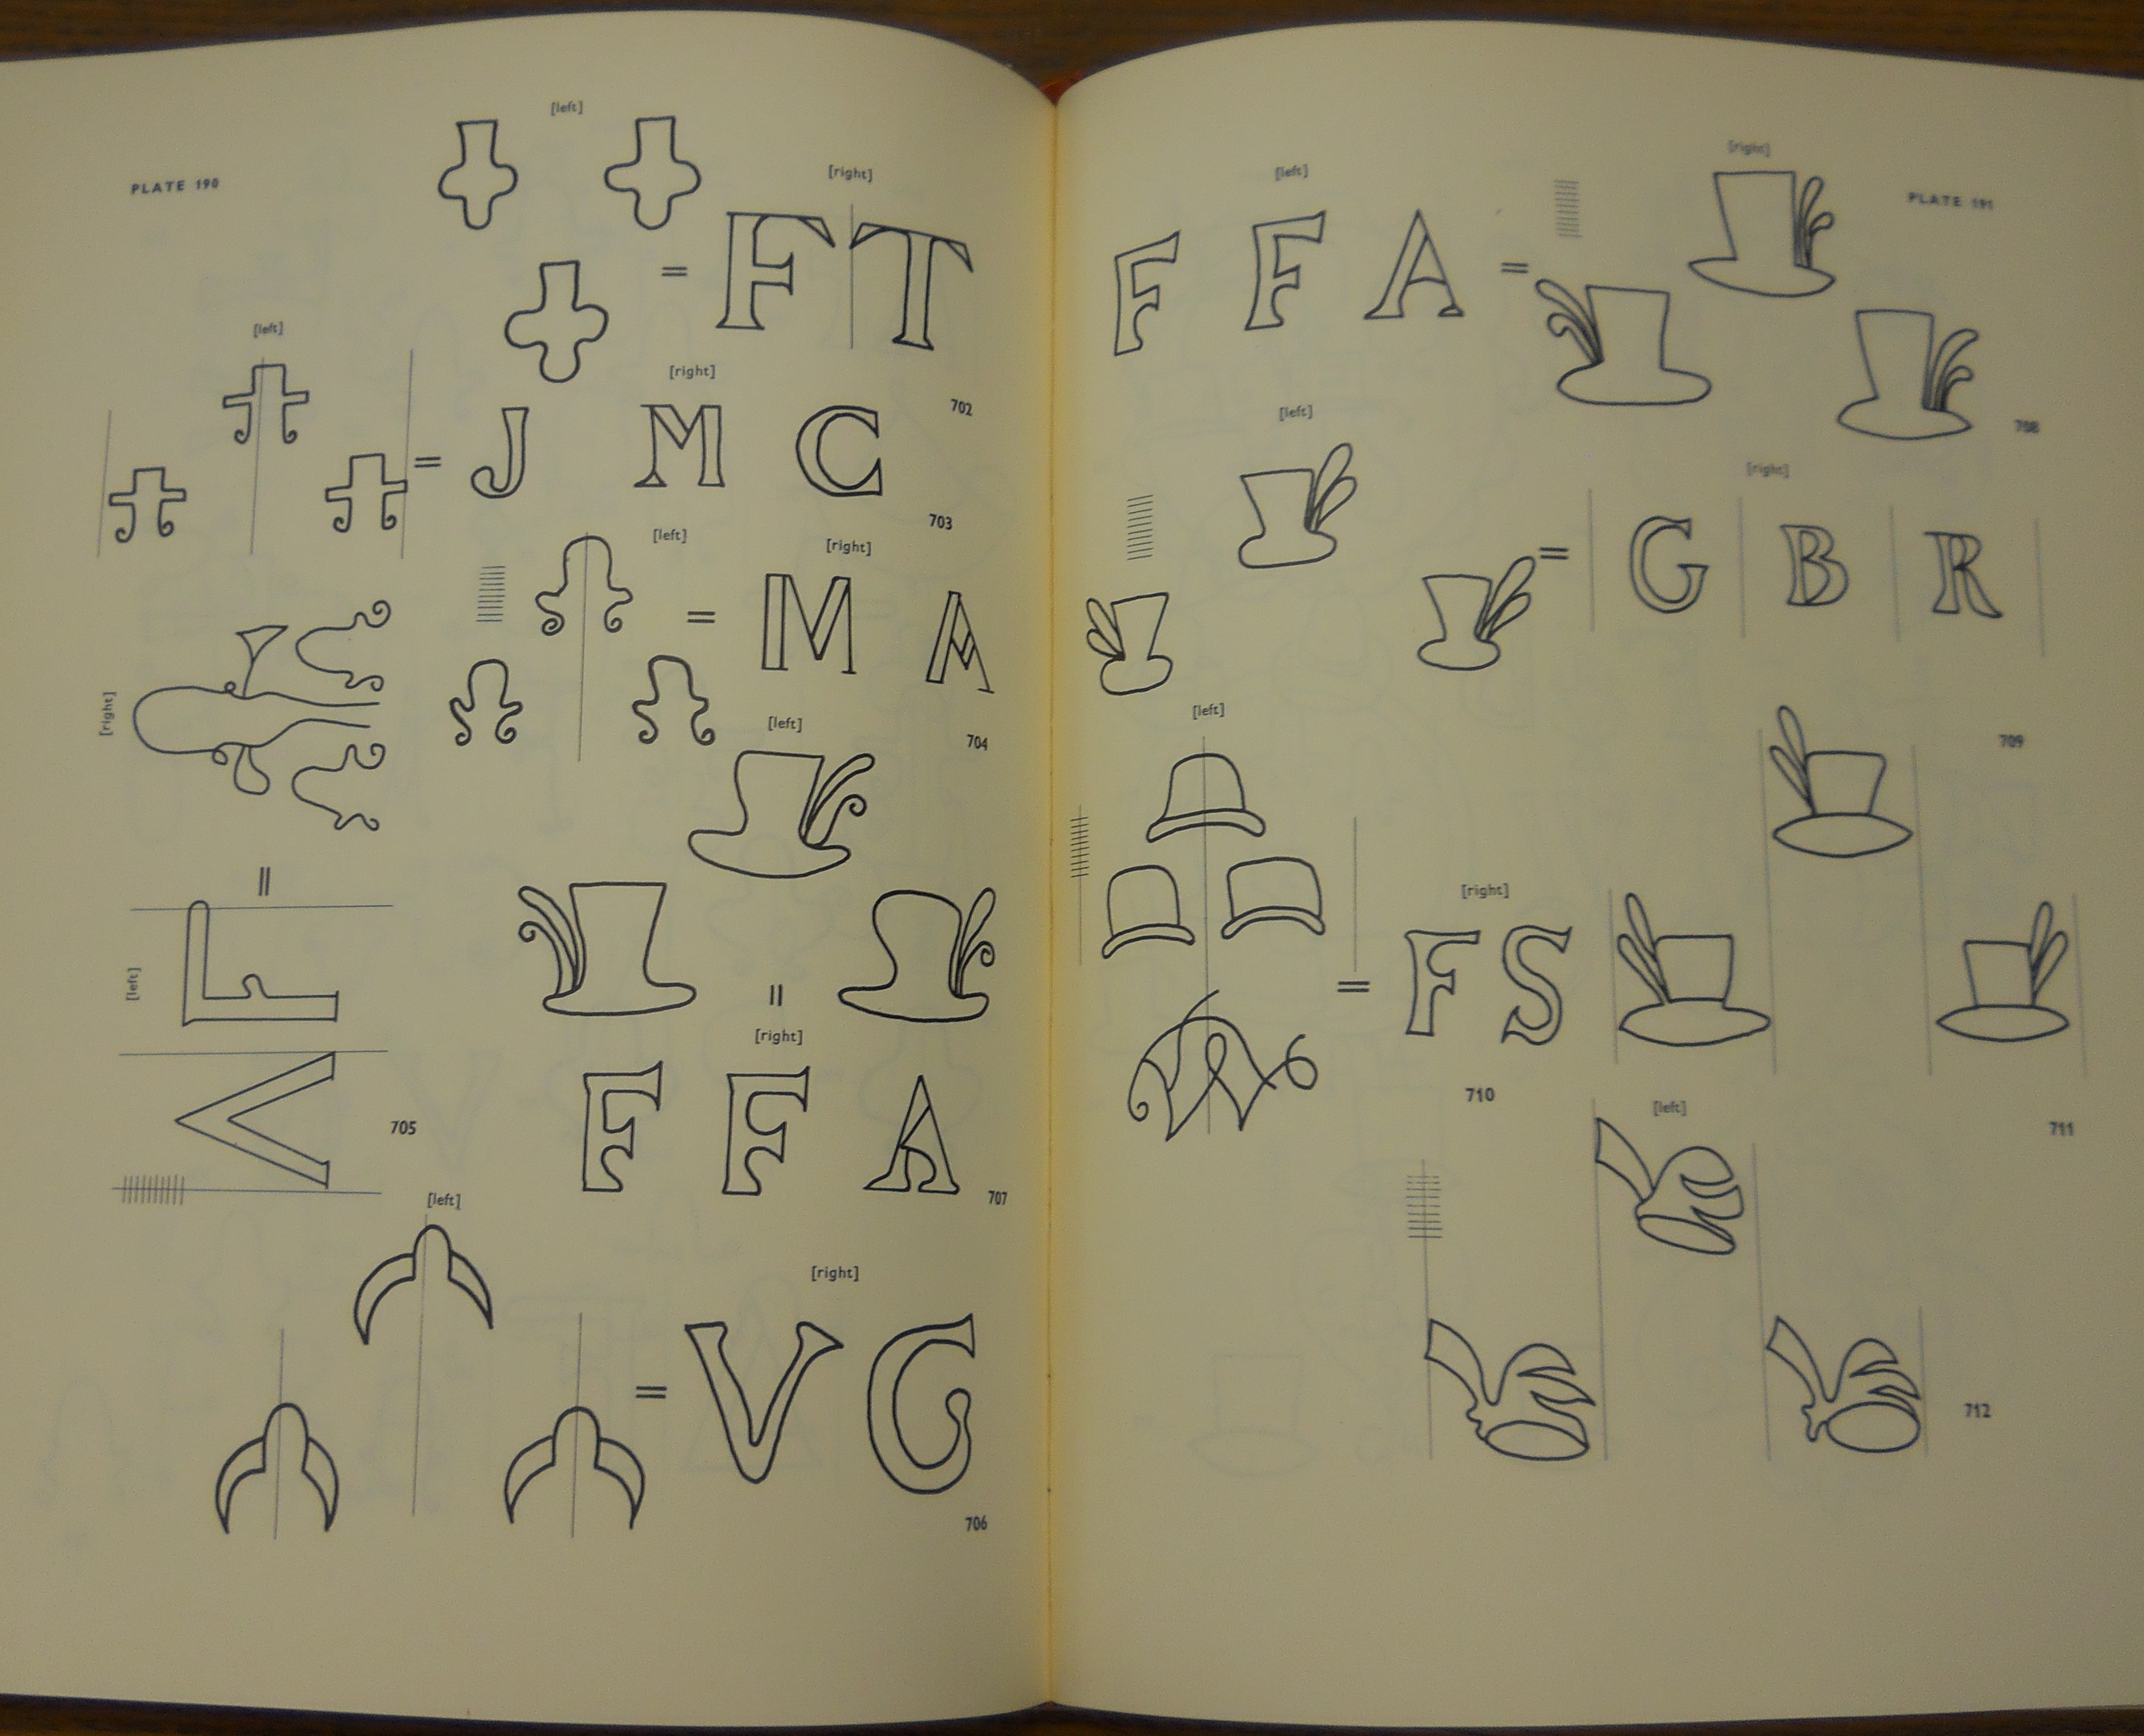 Selection of three hats watermarks in Eineder (Plate 190-191)